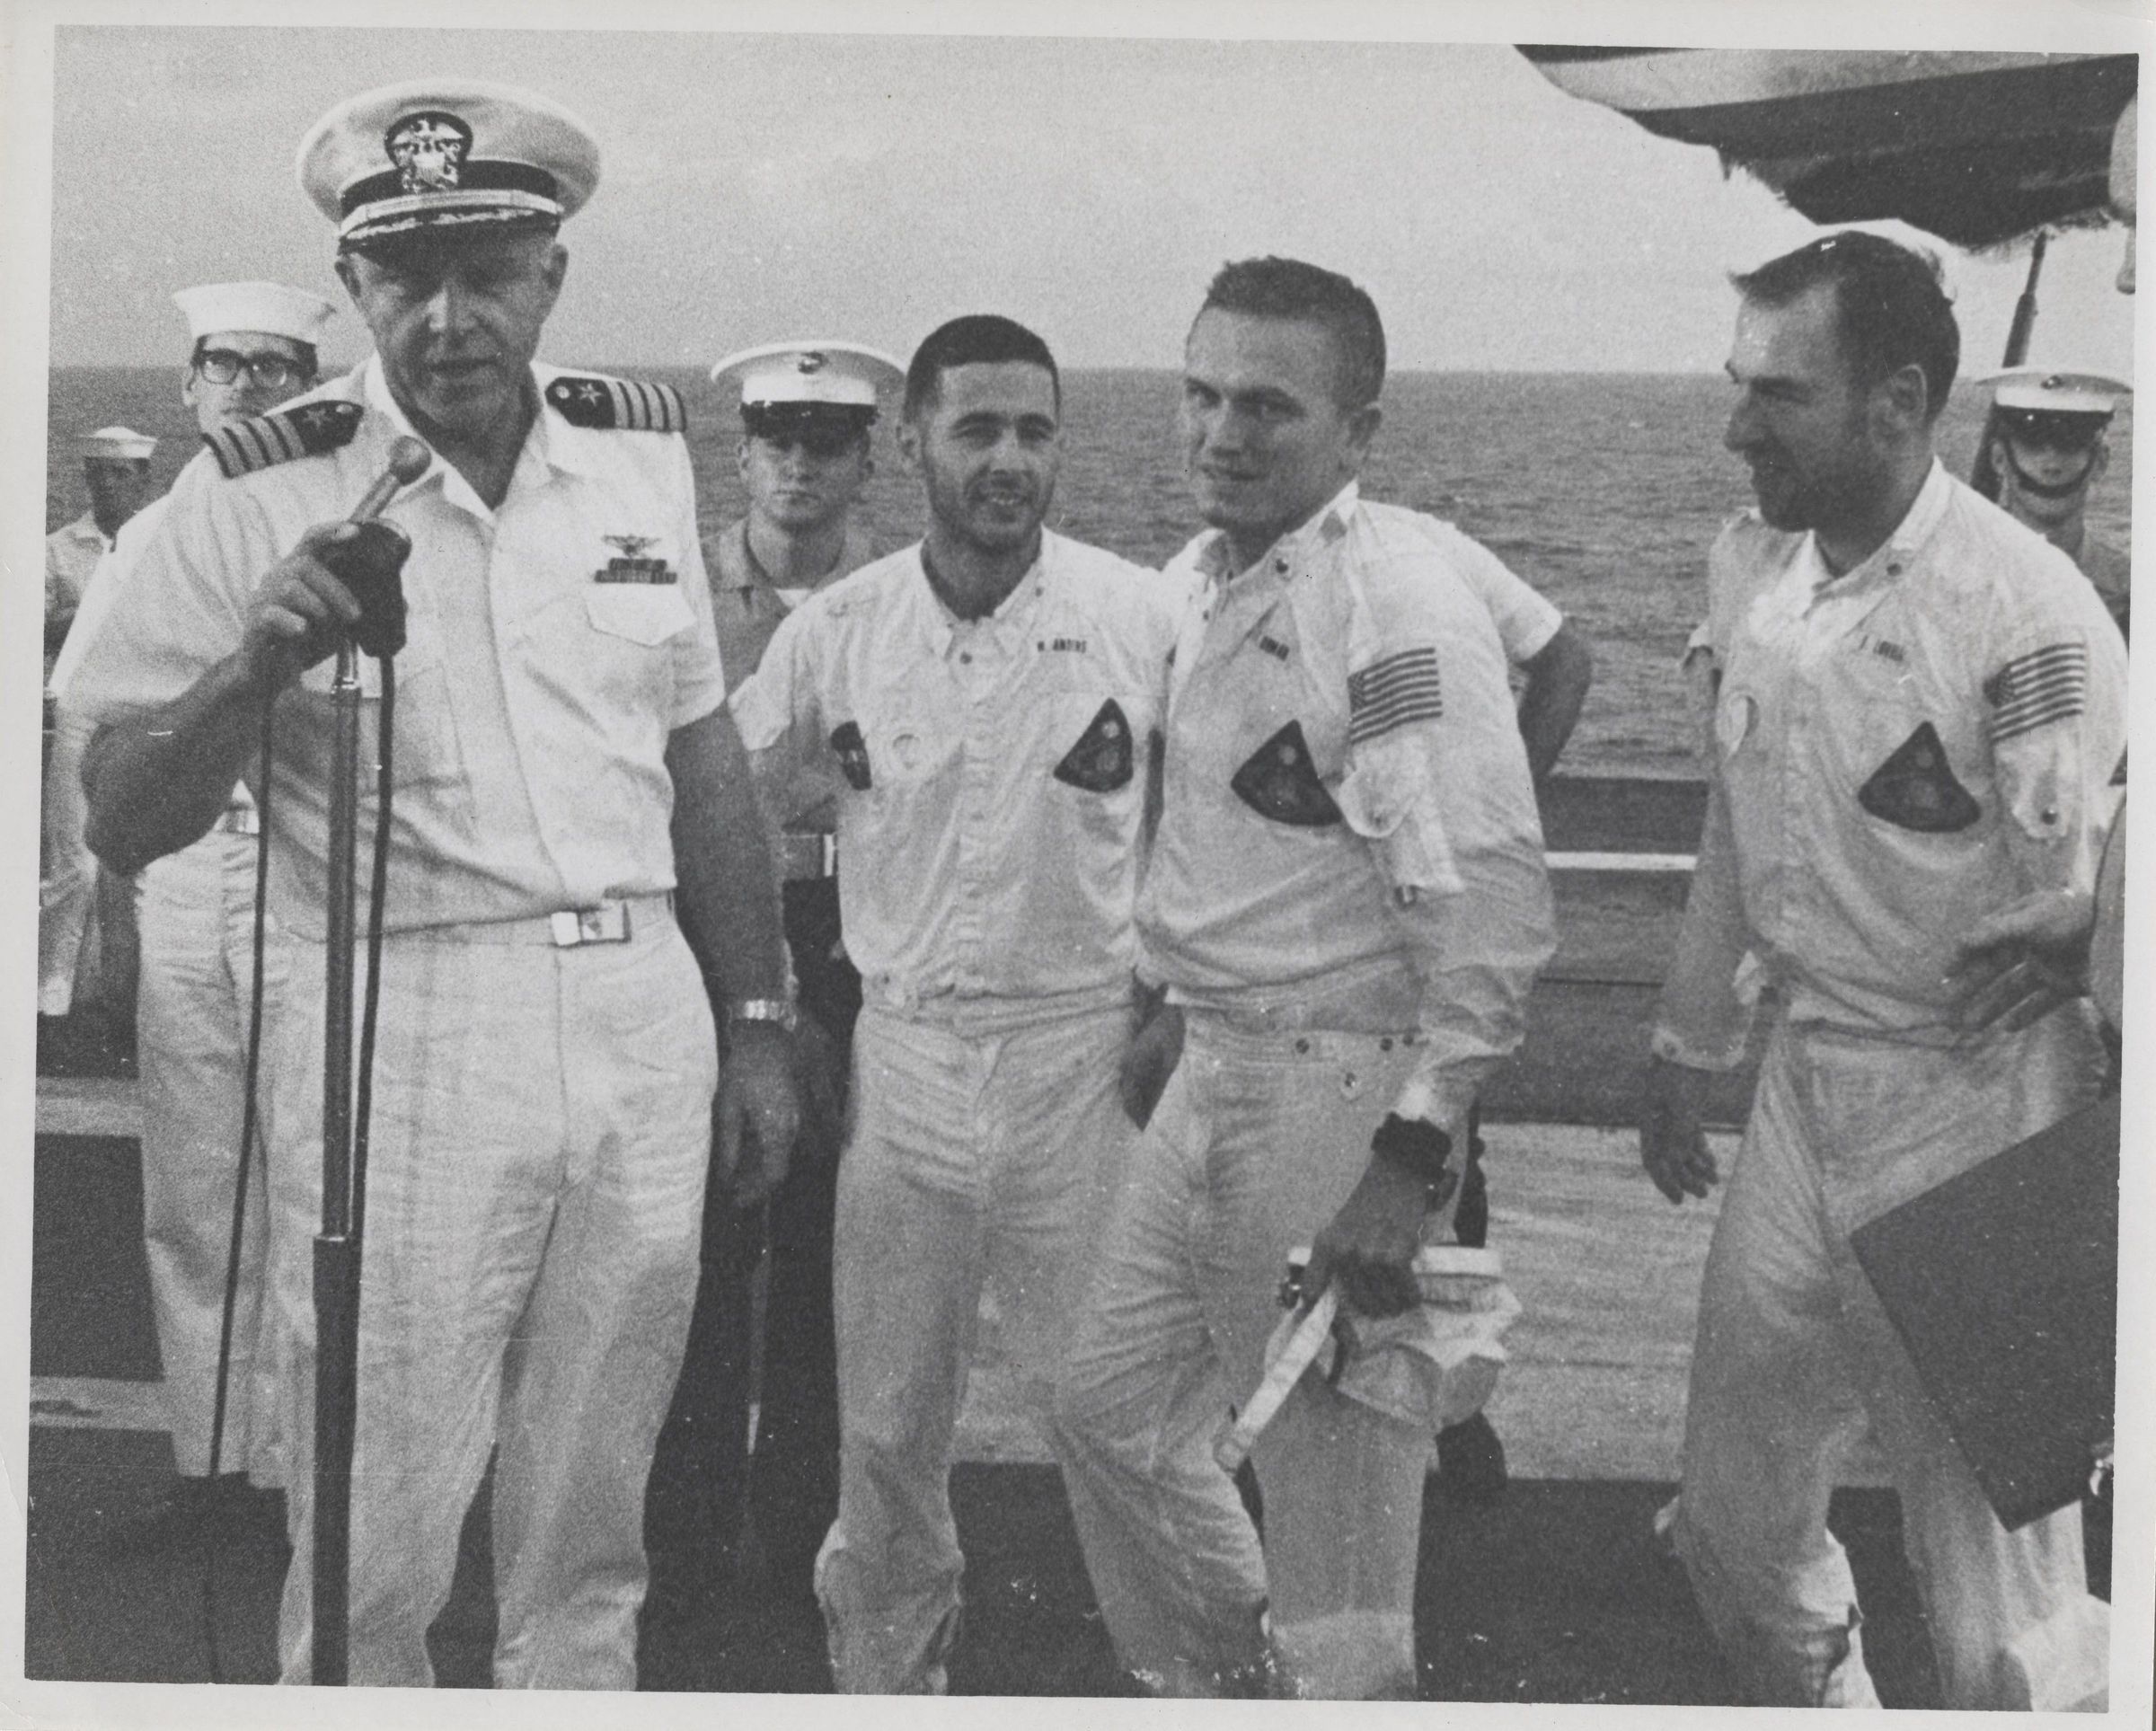 Primary Image of Captain John Fifield Addresses The Yorktown's Crew Following the Recovery of Apollo 8